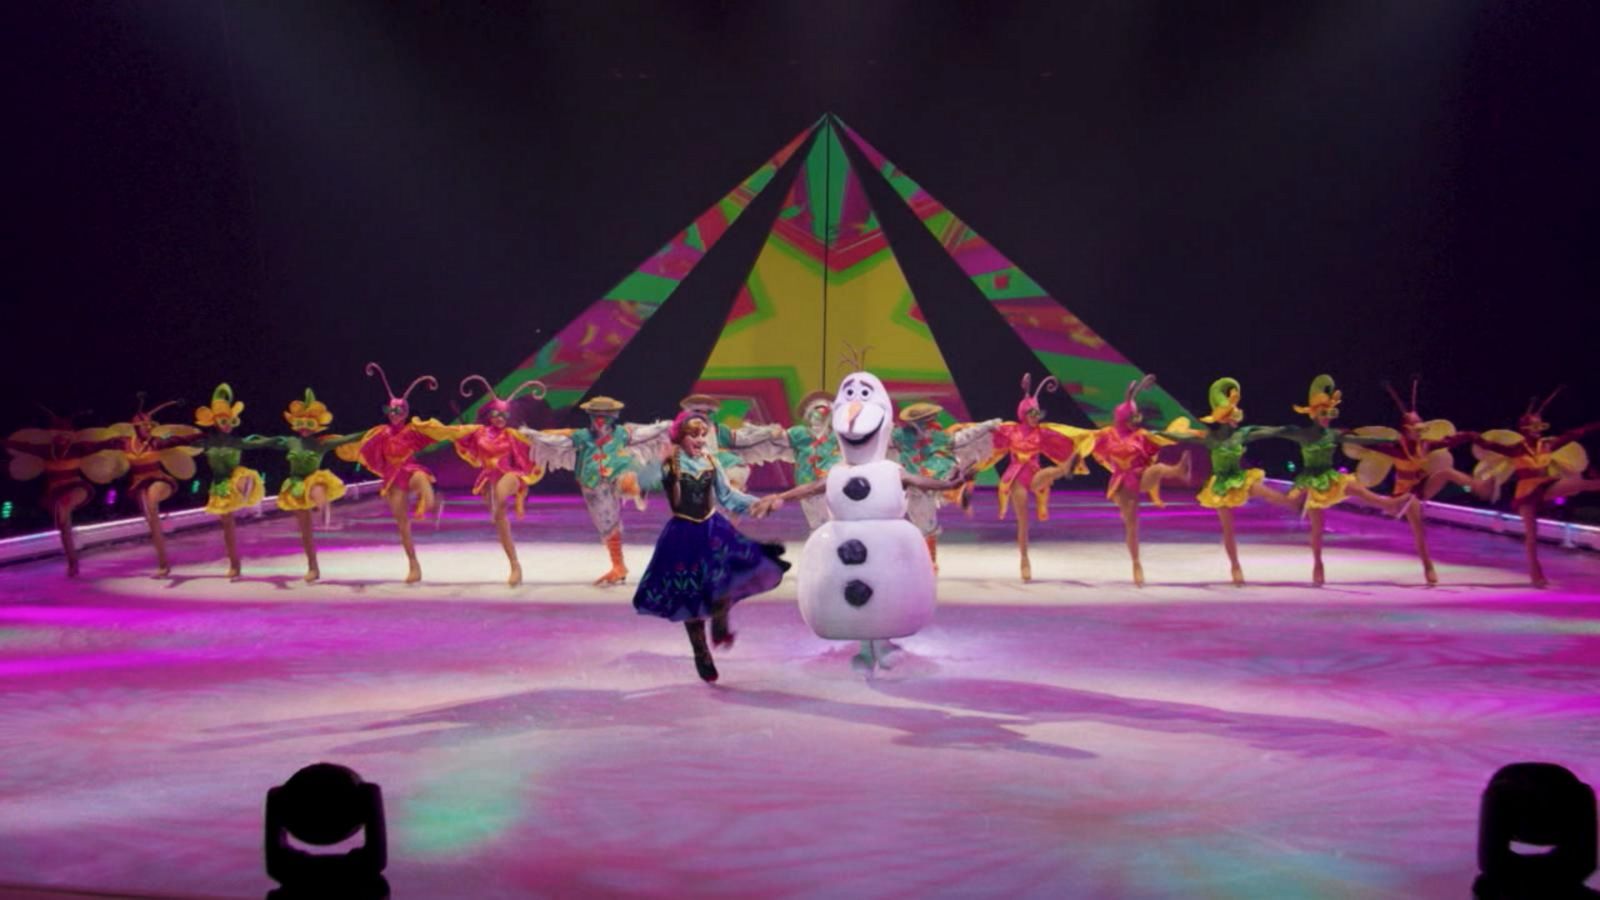 Behind the scenes of “Disney on Ice Presents Frozen and Encanto